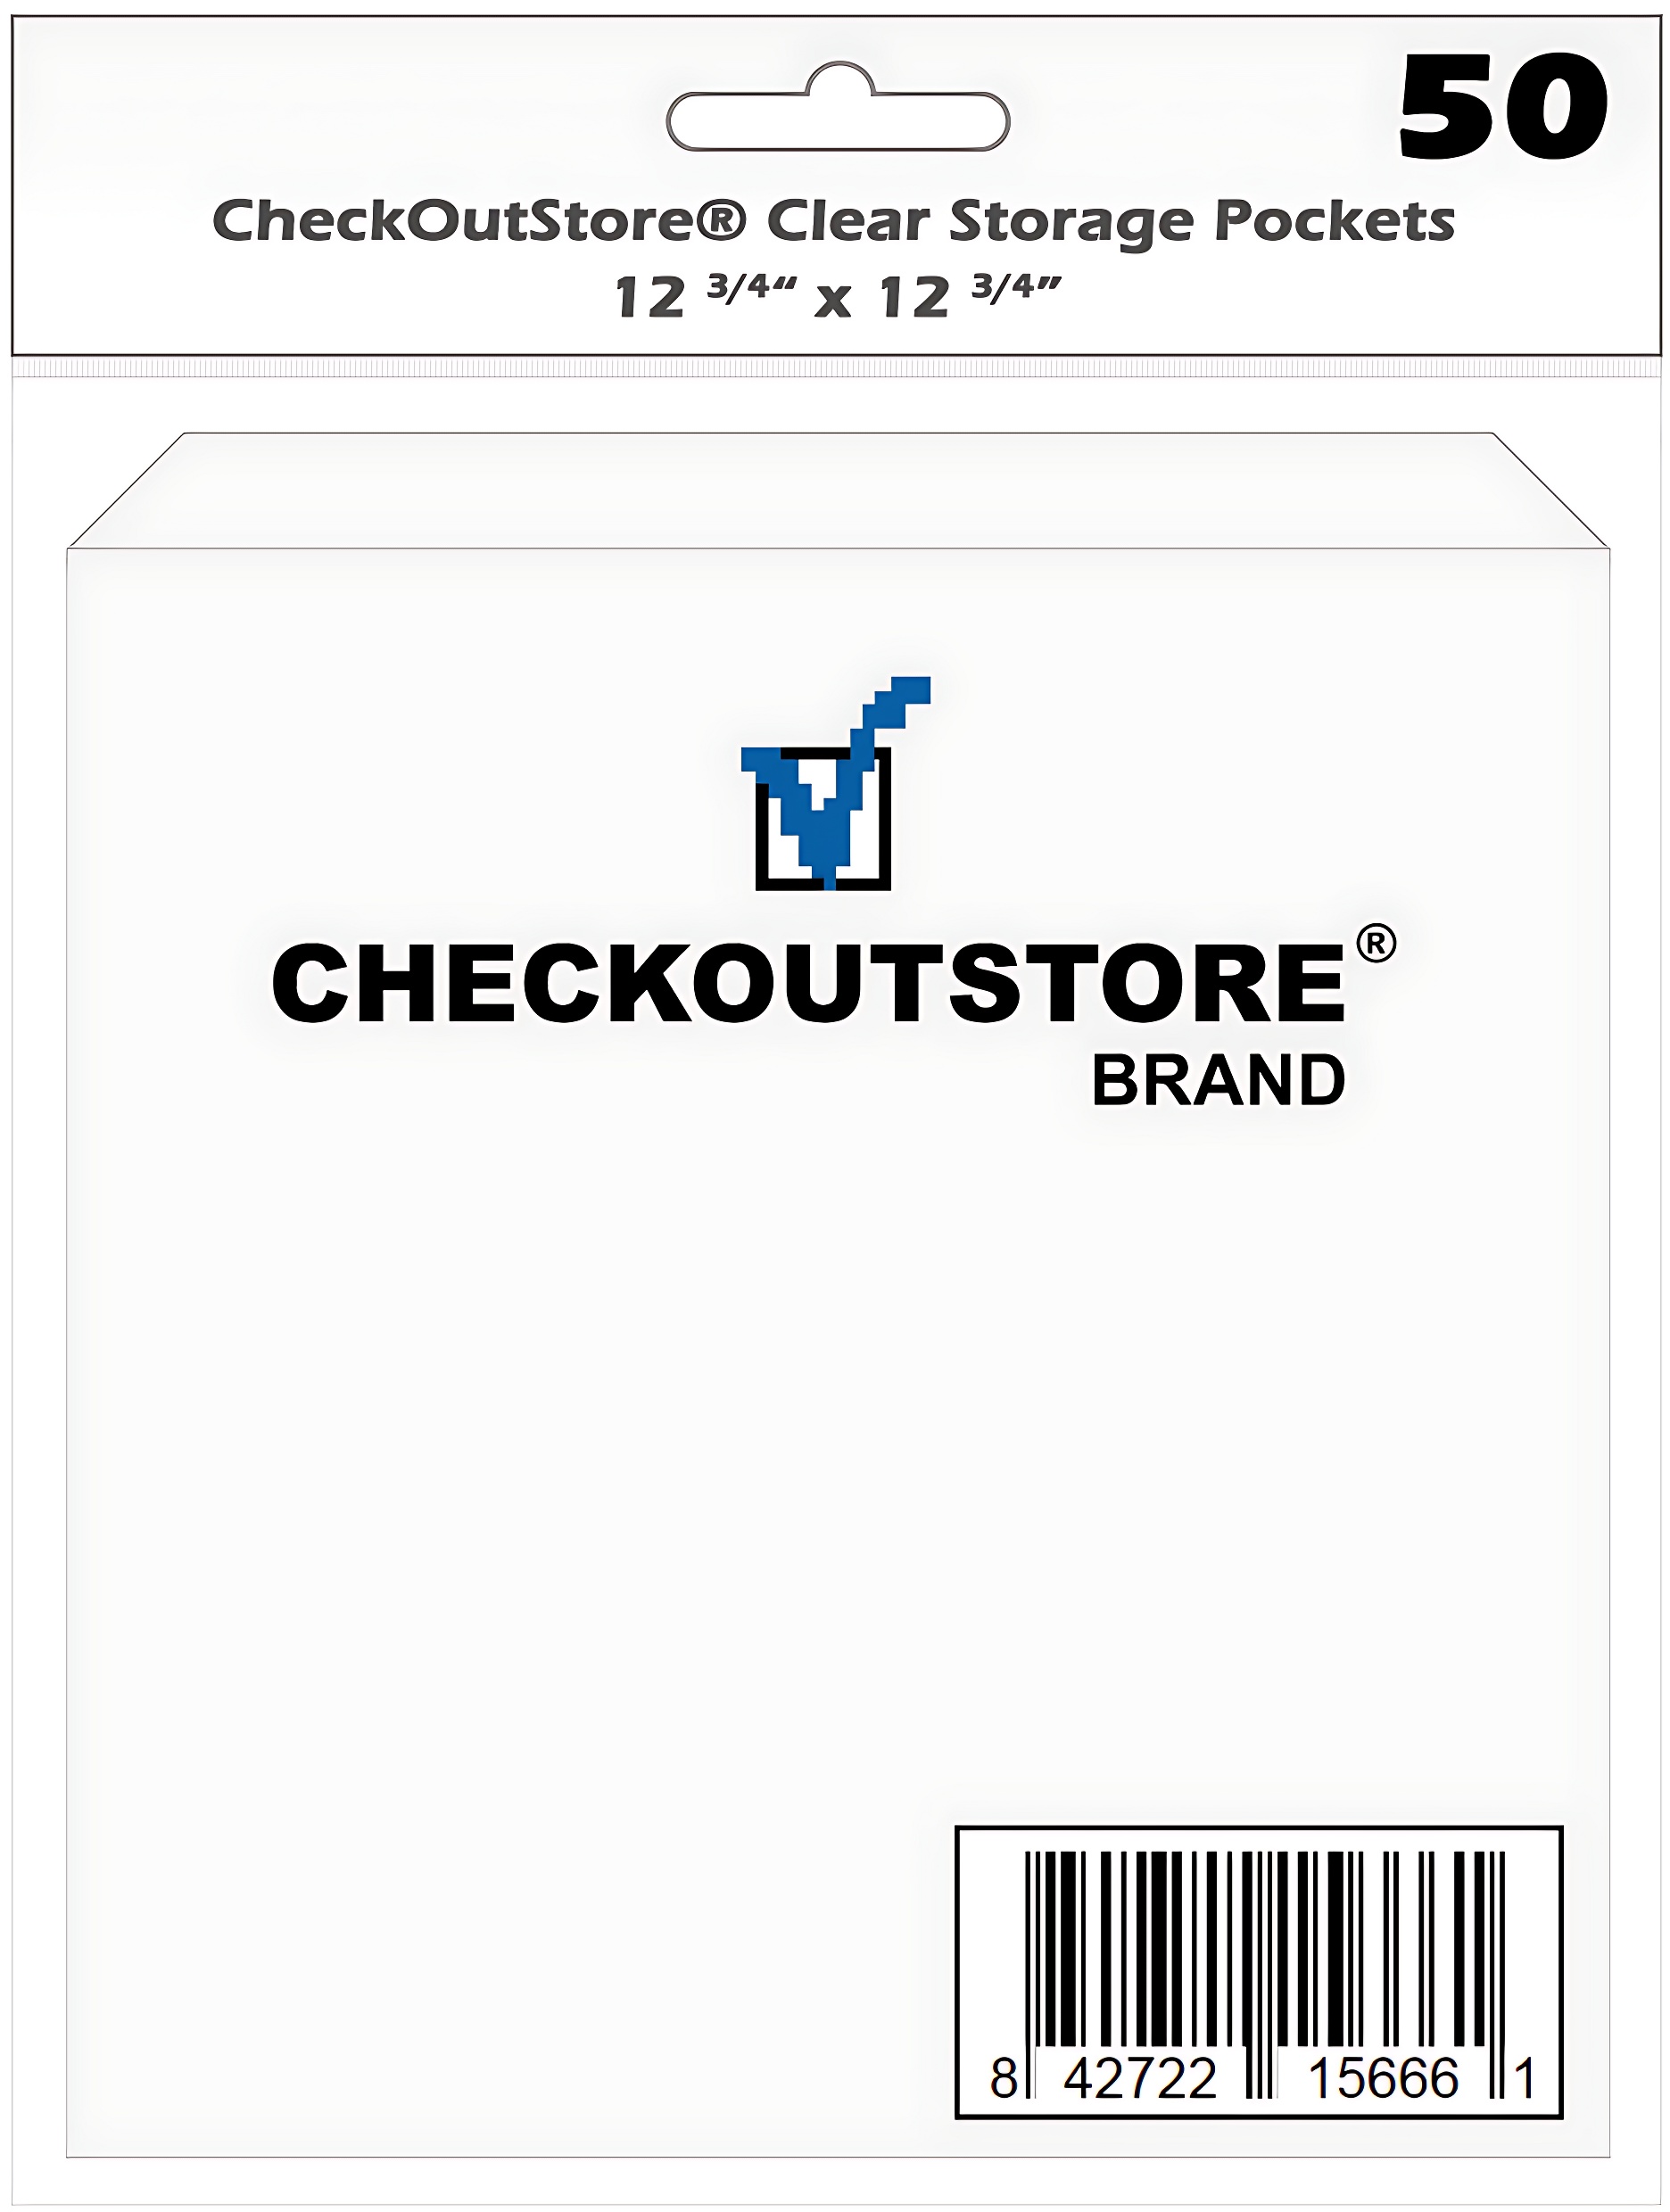 Image of ID 1214261421 500 CheckOutStore Cardstock Clear Storage Pockets (12 3/4 x 12 3/4)